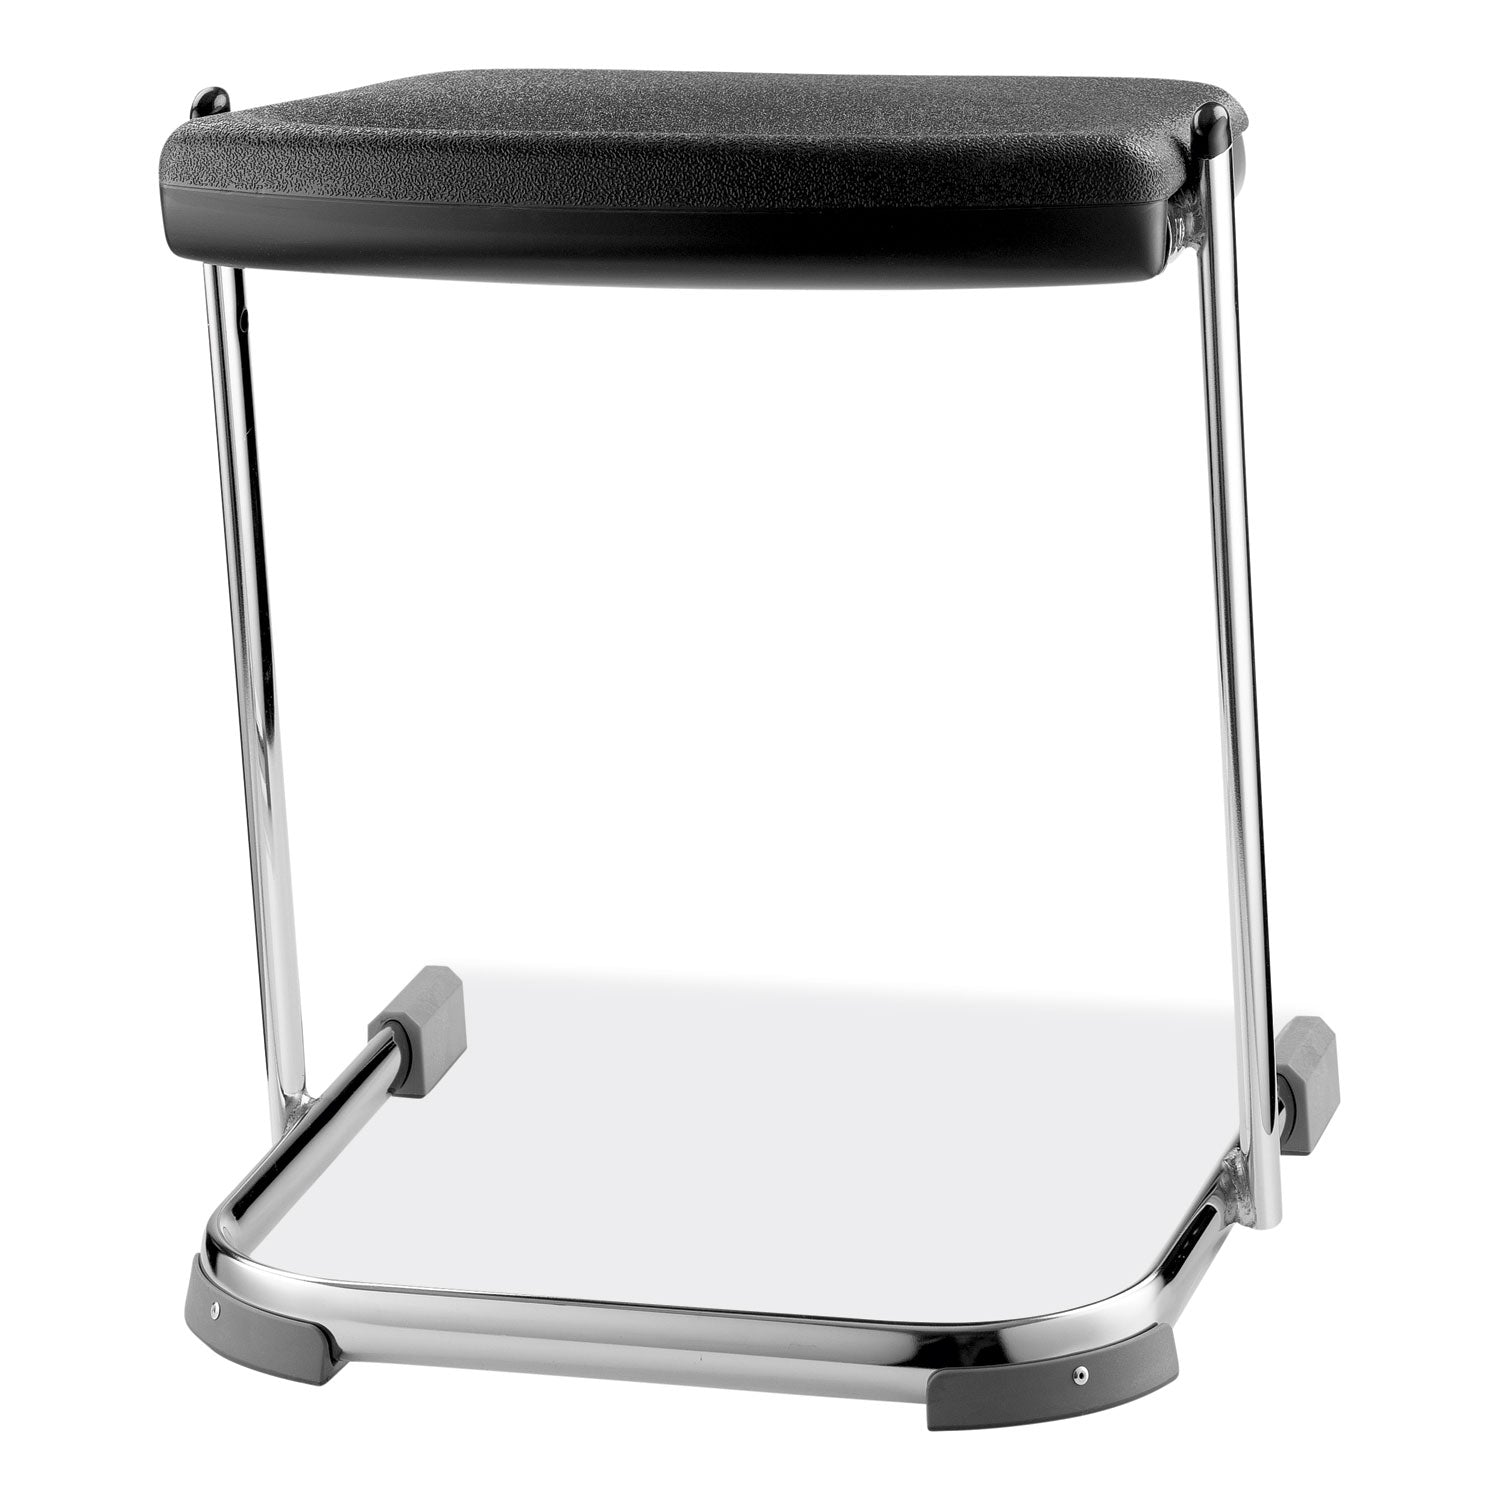 6600-series-elephant-z-stool-backless-supports-up-to-500lb-18-seat-height-black-seat-chrome-frameships-in-1-3-bus-days_nps6618 - 3